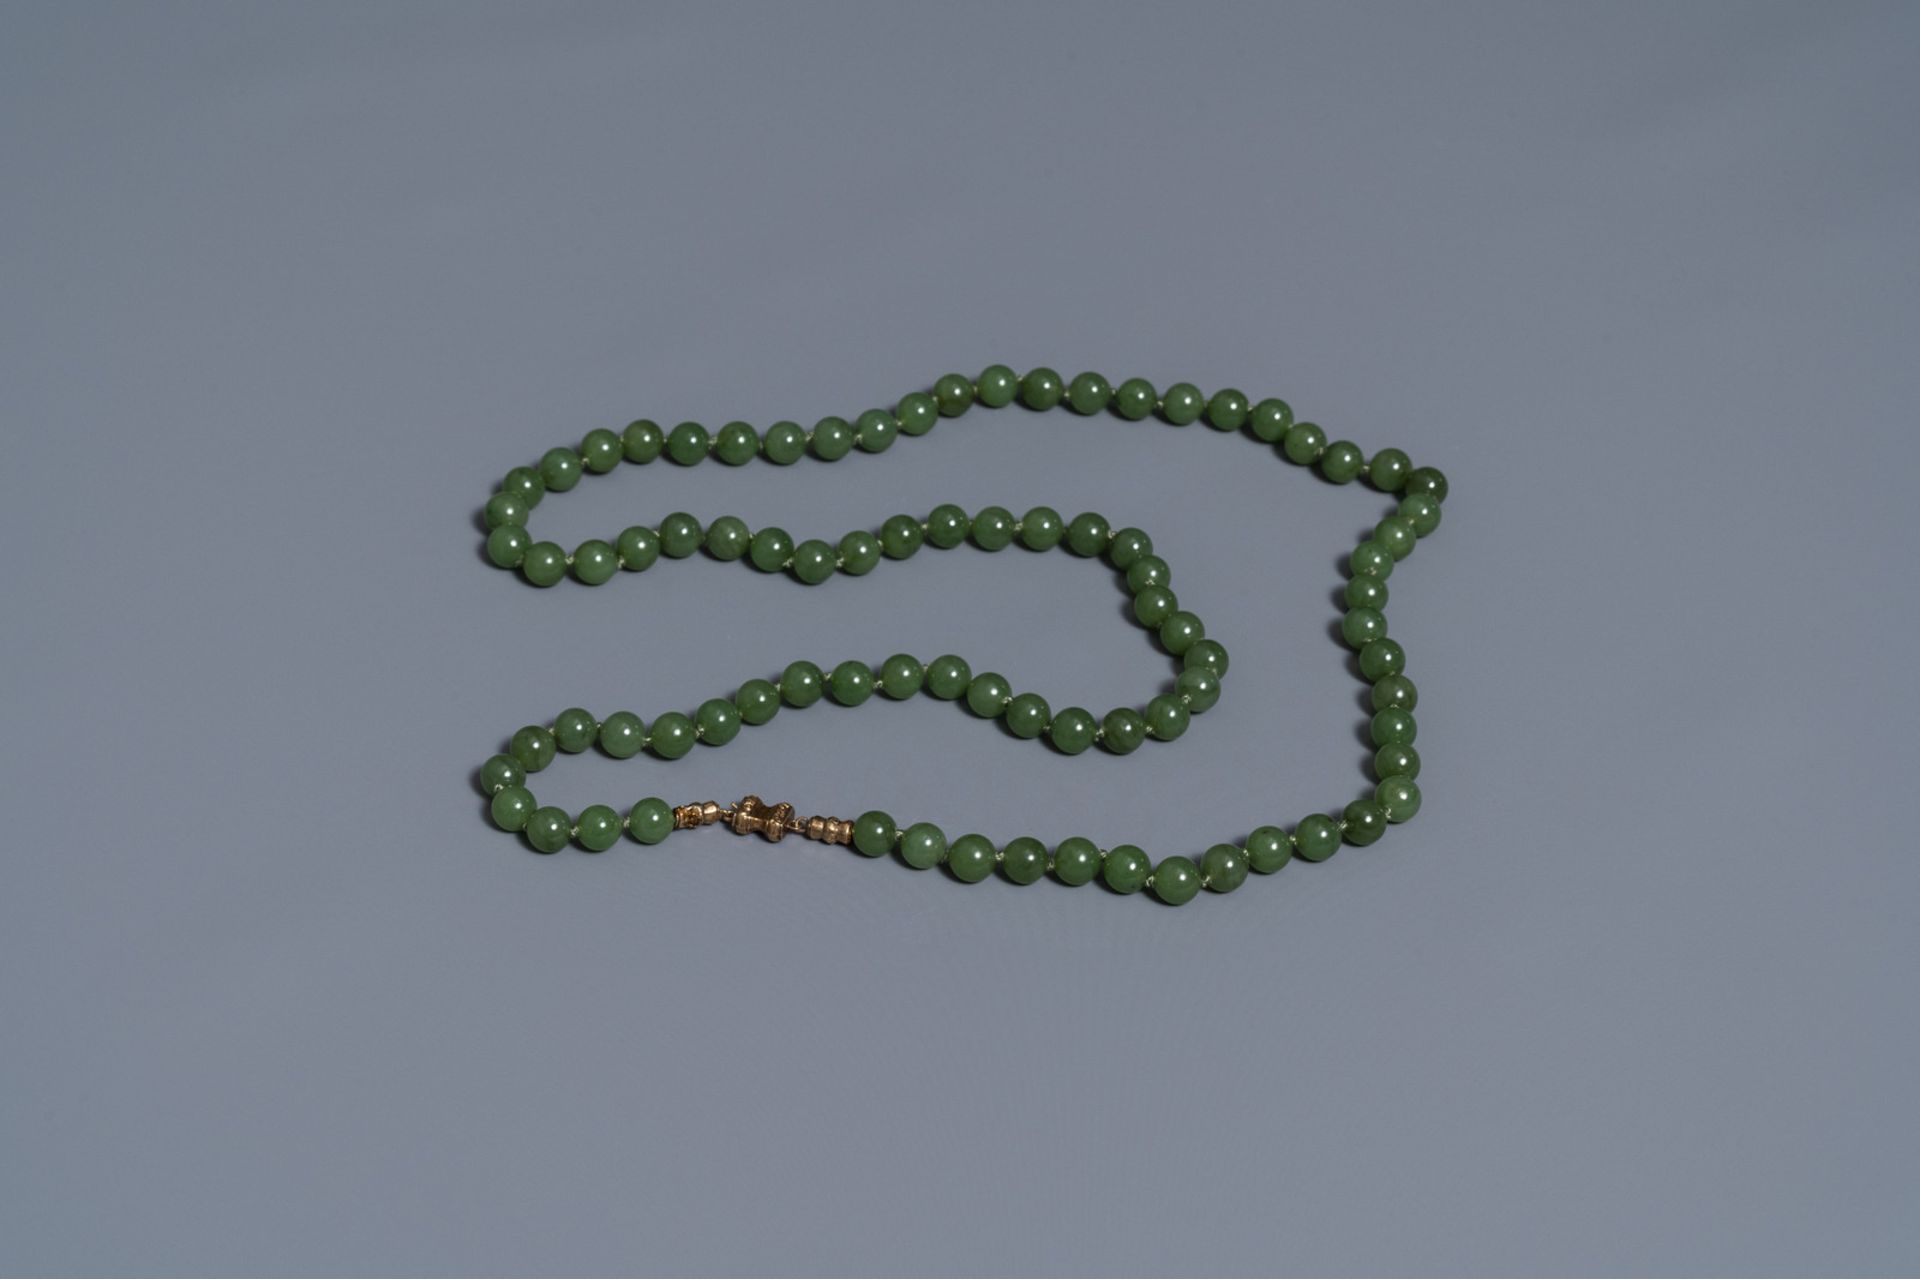 Two Chinese necklaces and a bracelet with spinach green jade beads, 20th C. - Image 5 of 5